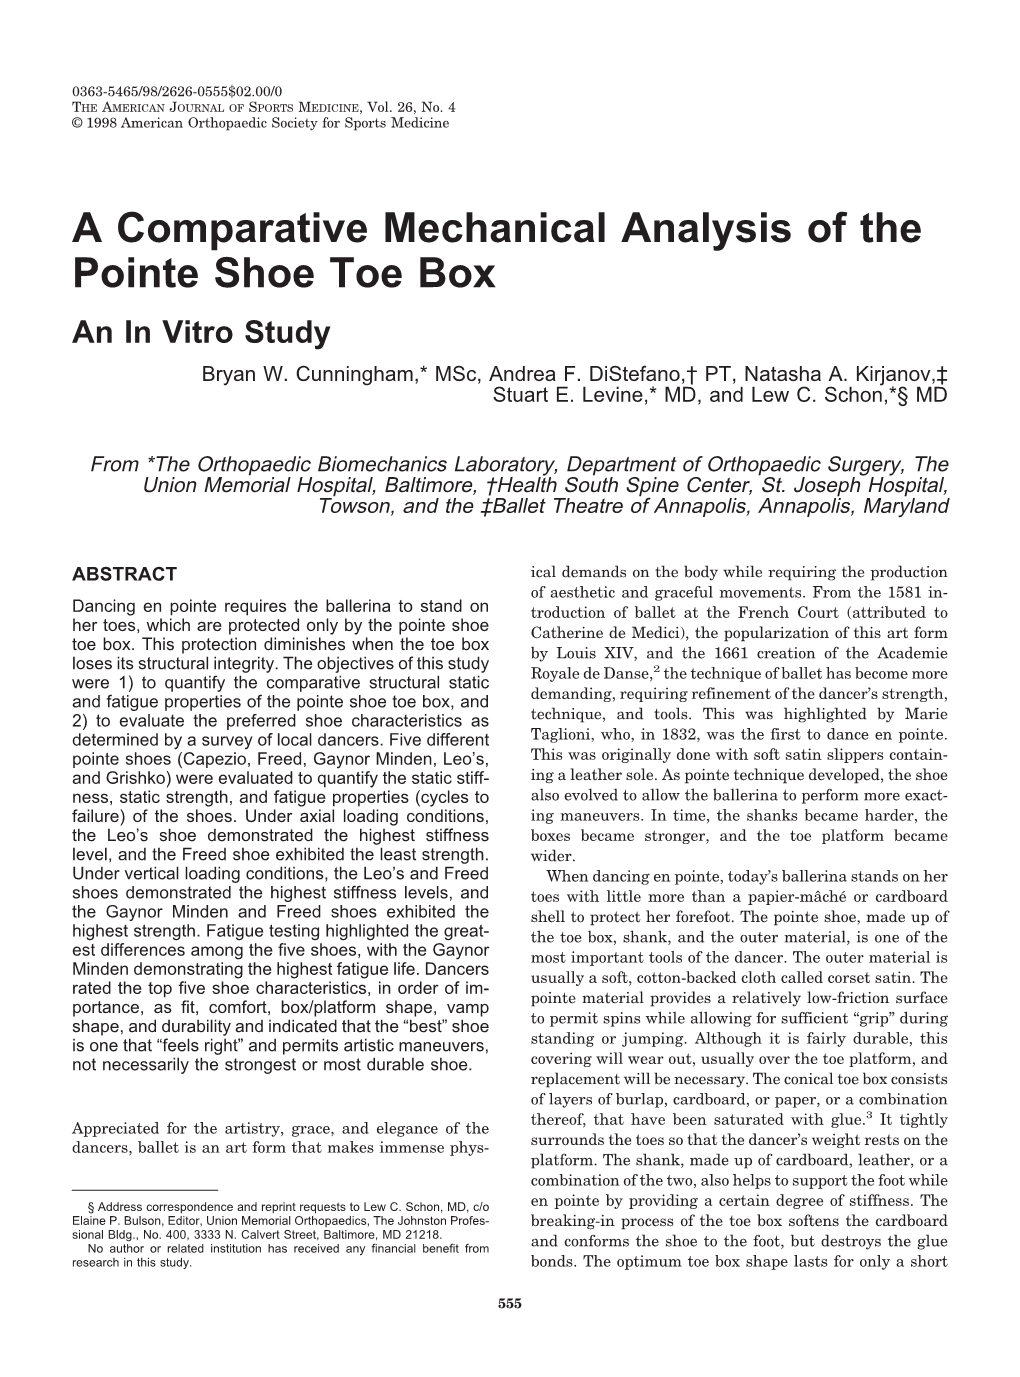 A Comparative Mechanical Analysis of the Pointe Shoe Toe Box an in Vitro Study Bryan W